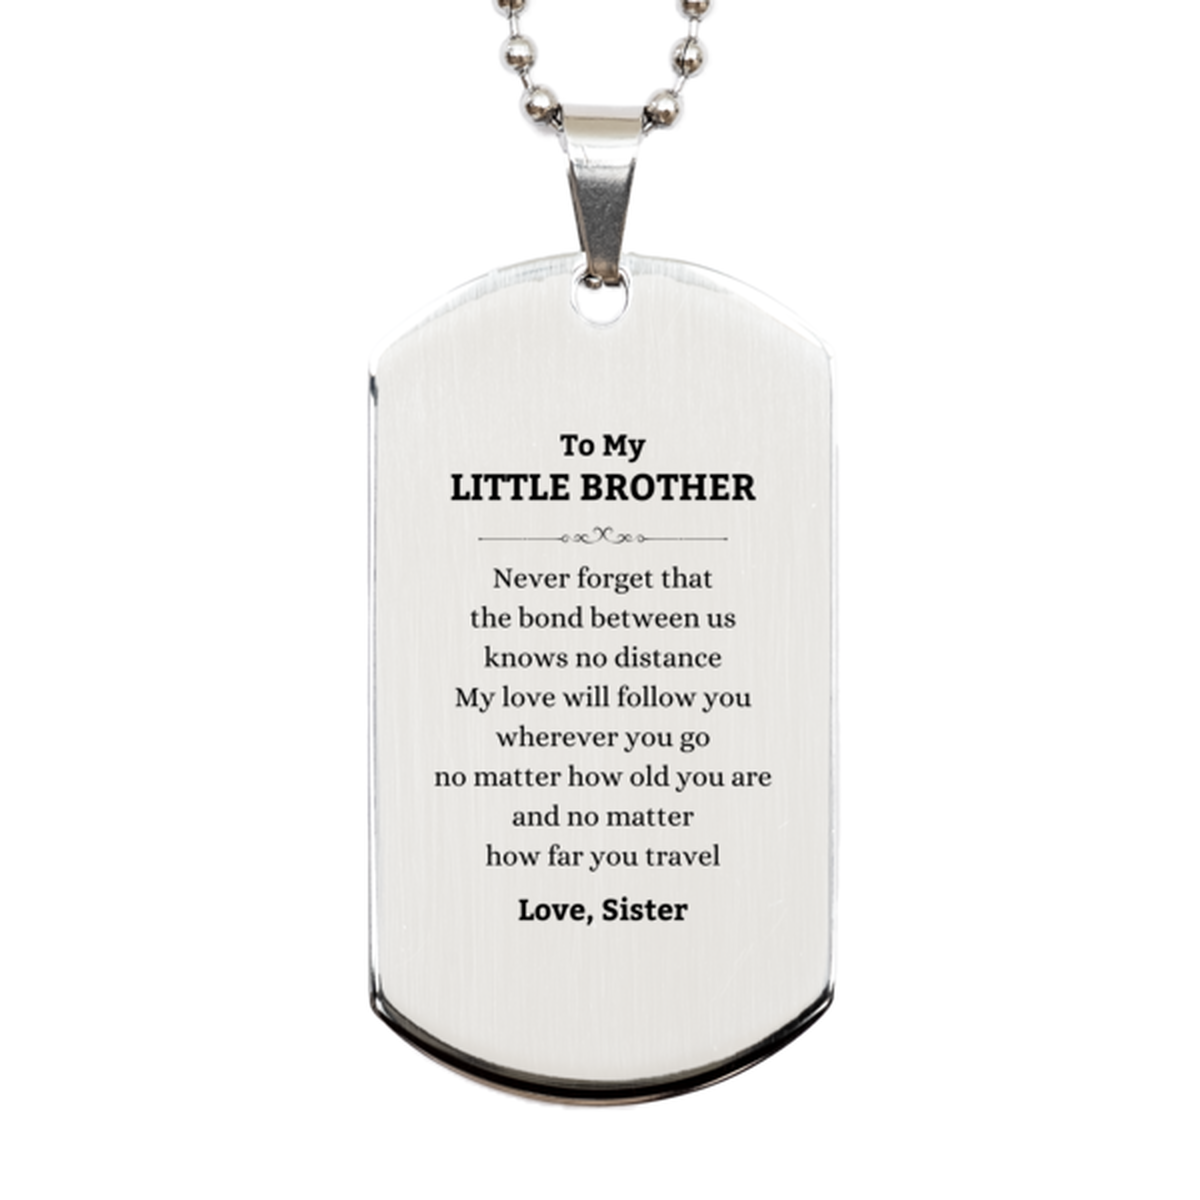 Little Brother Birthday Gifts from Sister, Adjustable Silver Dog Tag for Little Brother Christmas Graduation Unique Gifts Little Brother Never forget that the bond between us knows no distance. Love, Sister